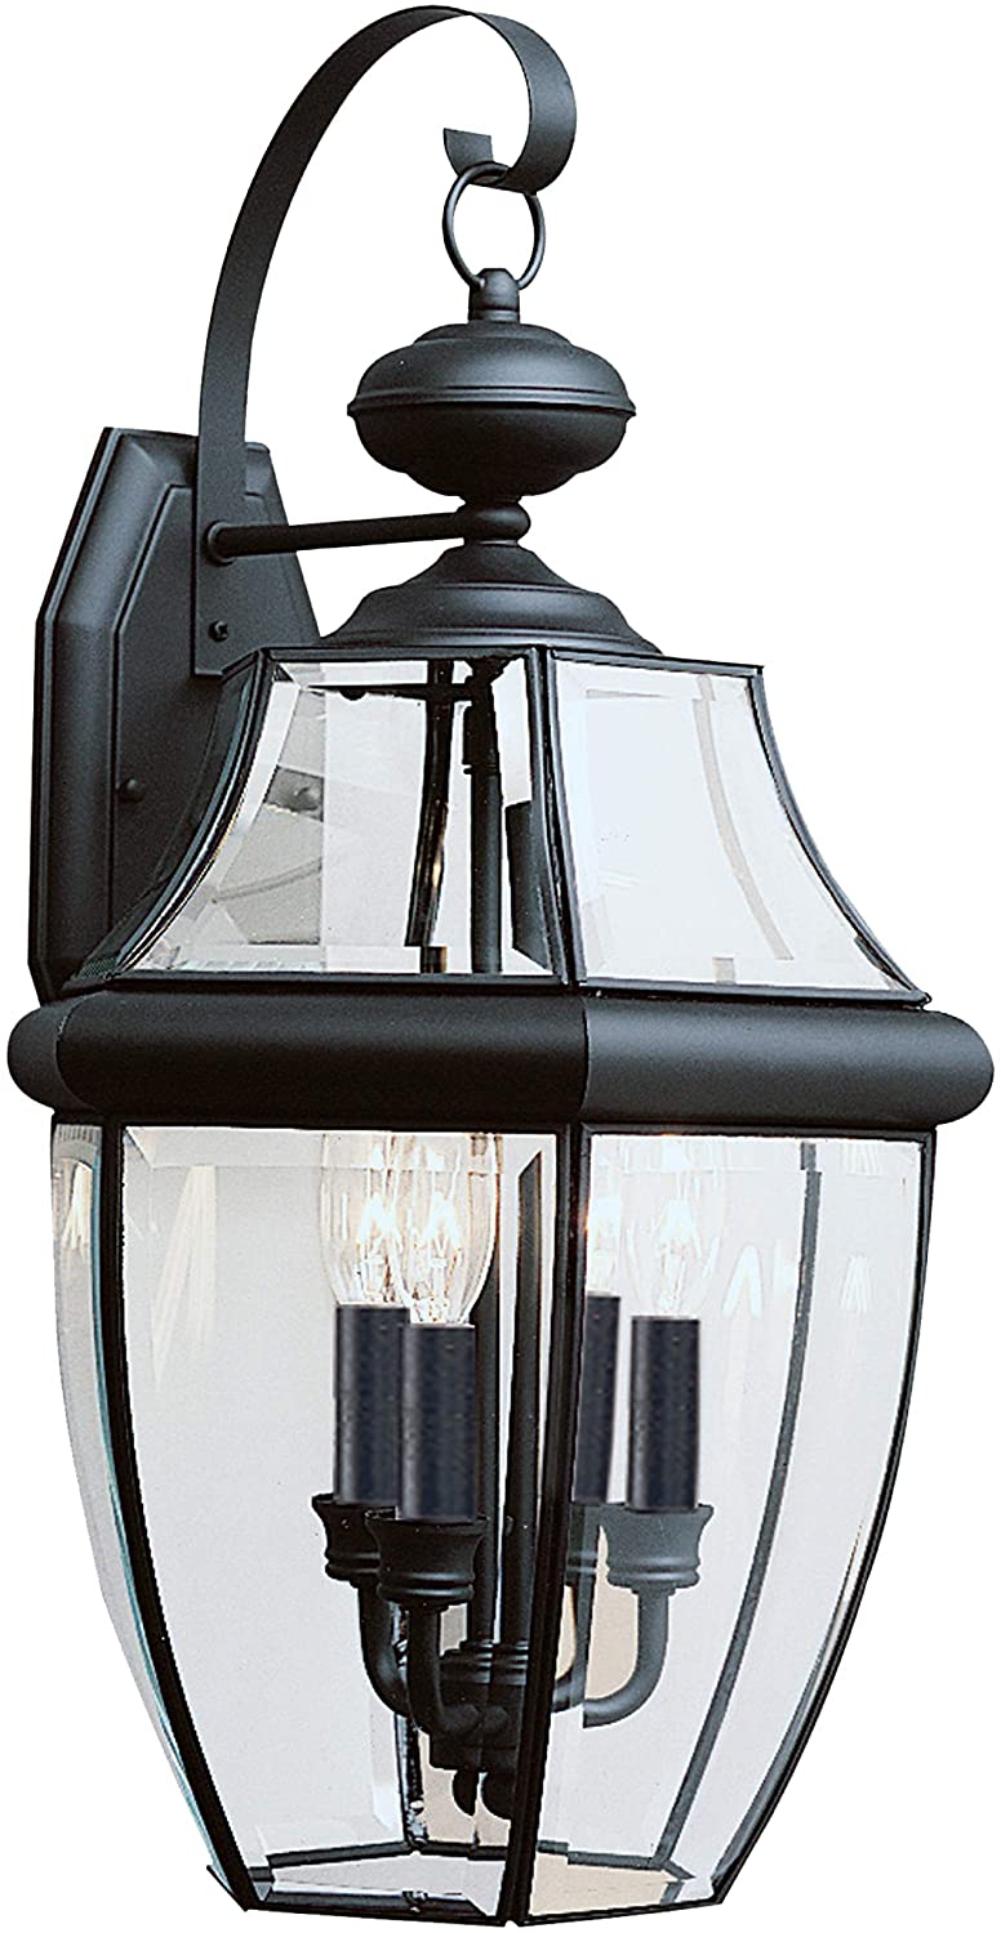 Sea Gull Lighting 8039-12 2-Light Lancaster Medium Outdoor Wall Lantern, Clear Beveled Glass and Black, Finish: Black By Visit the Sea Gull Lighting Store - image 1 of 5